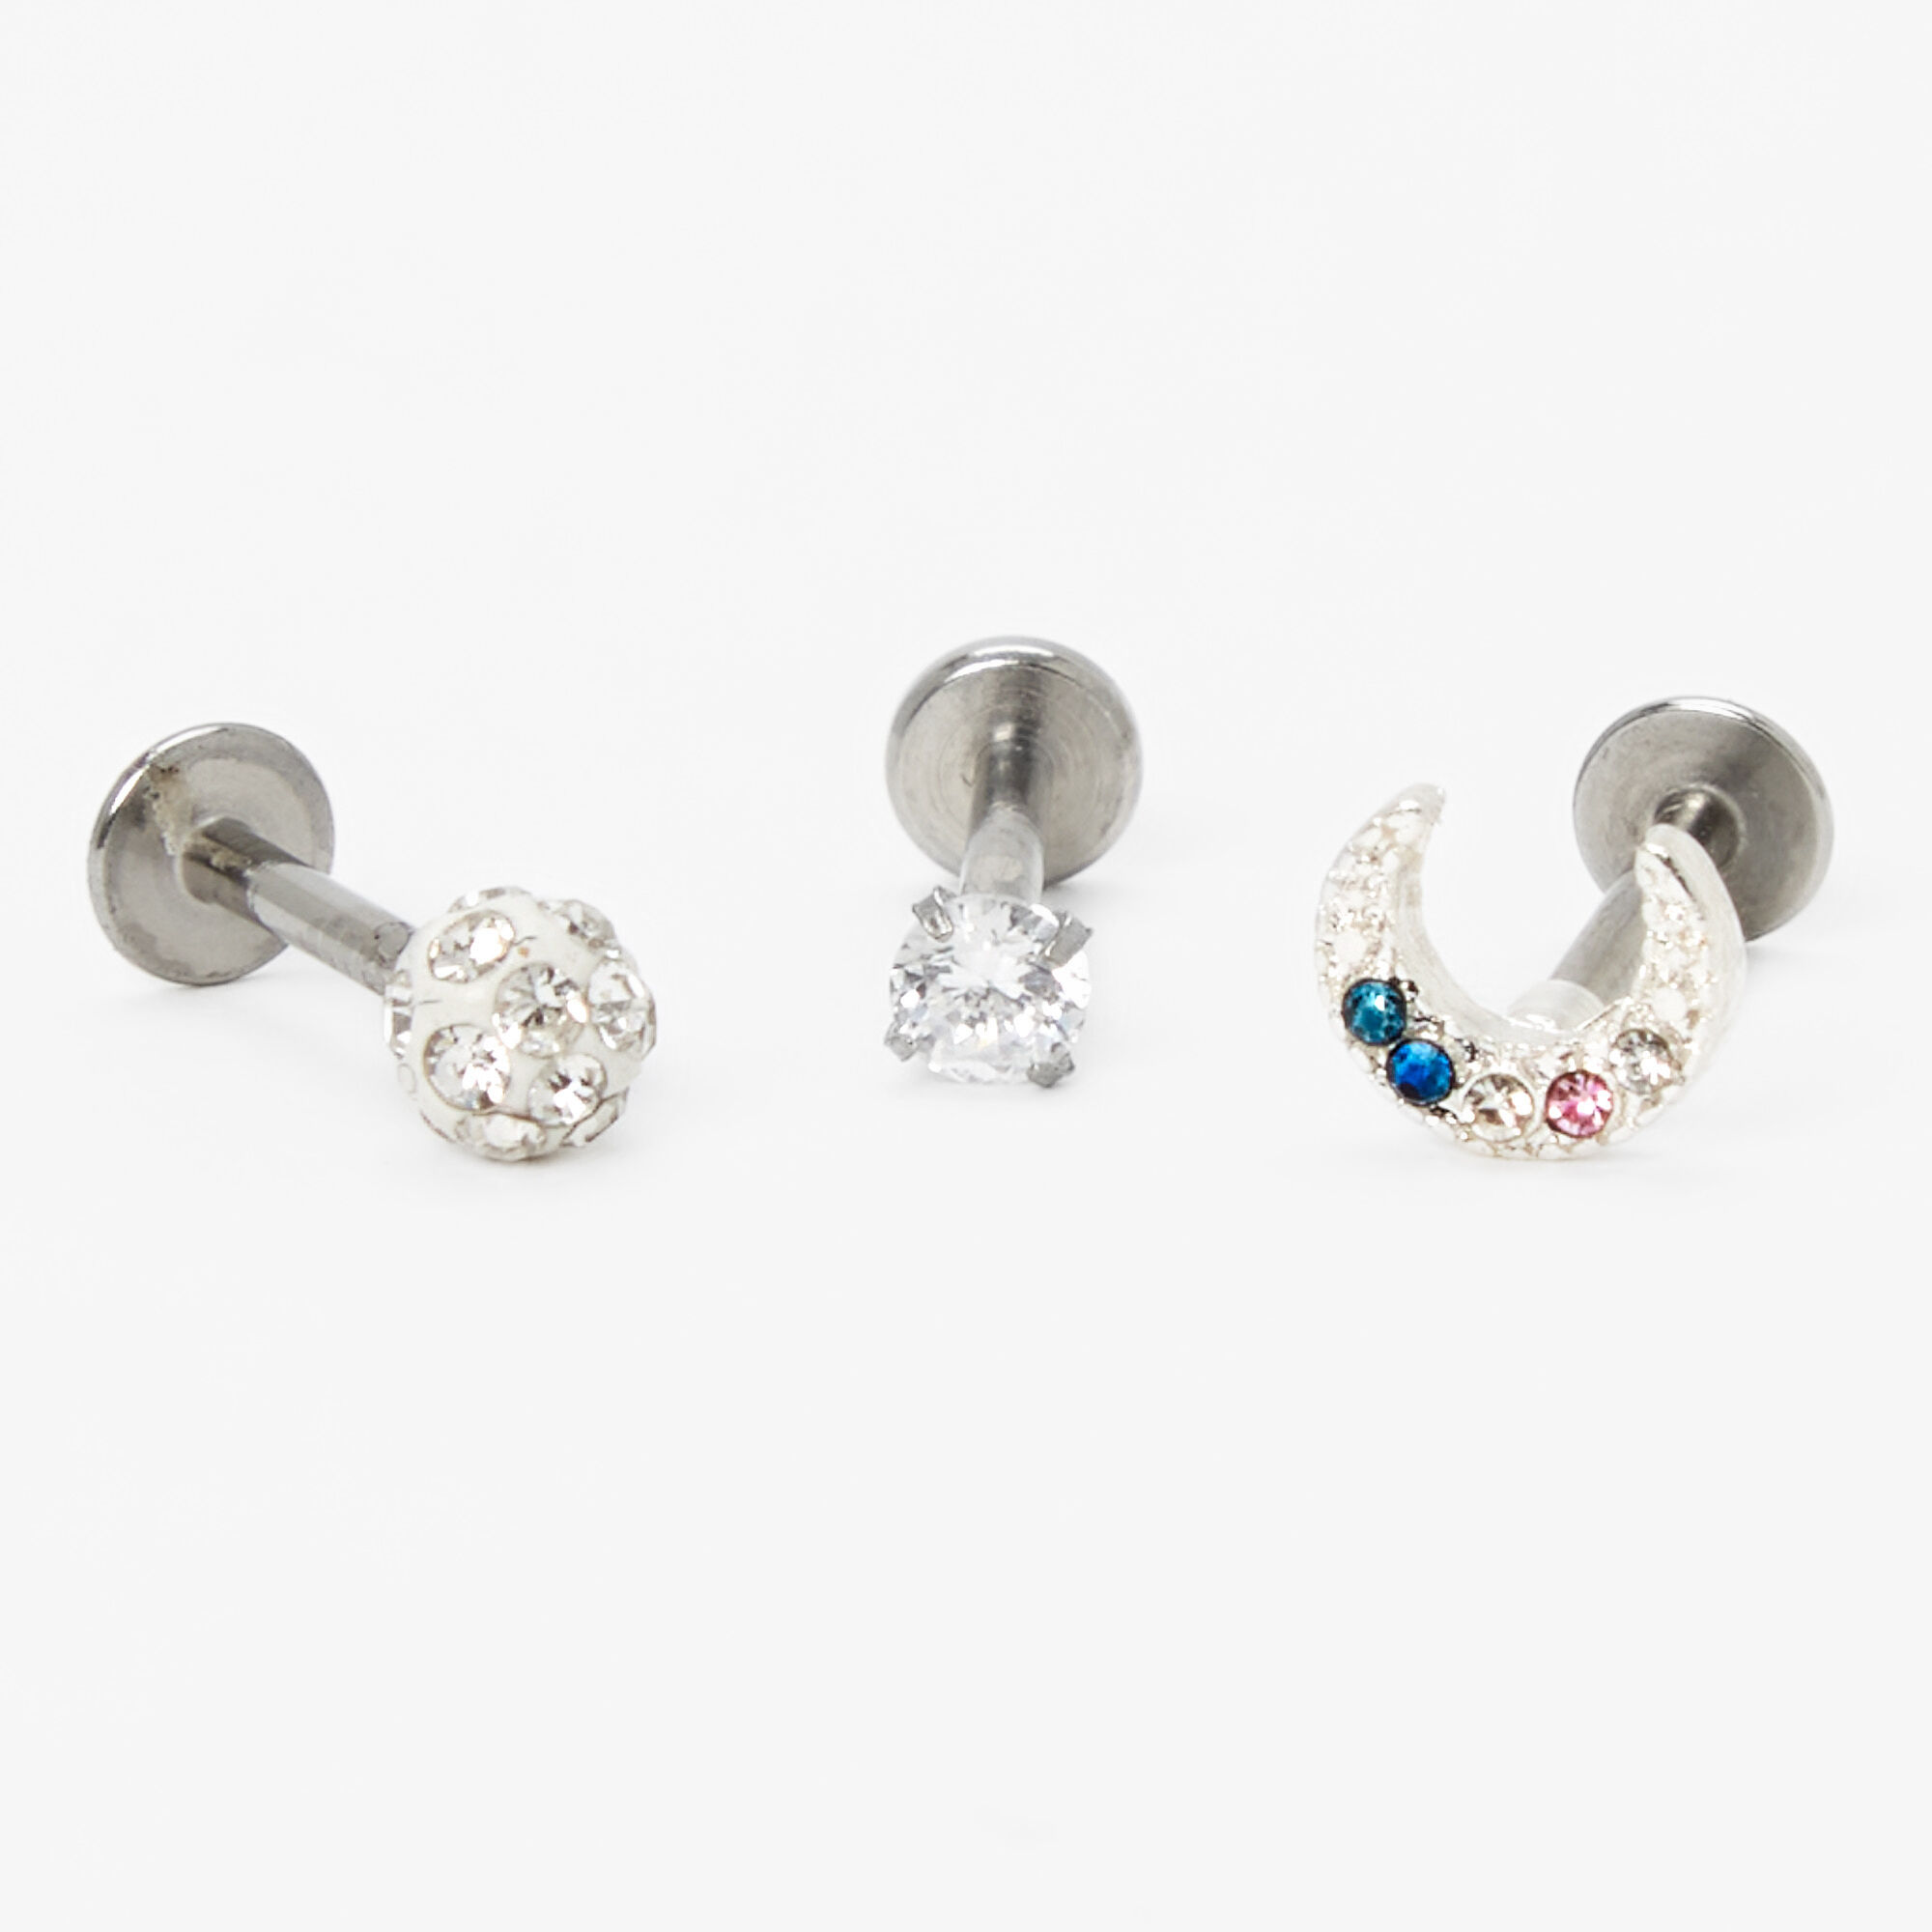 Flower Tragus Stud  Silver  PN0159P  buy at affordable price